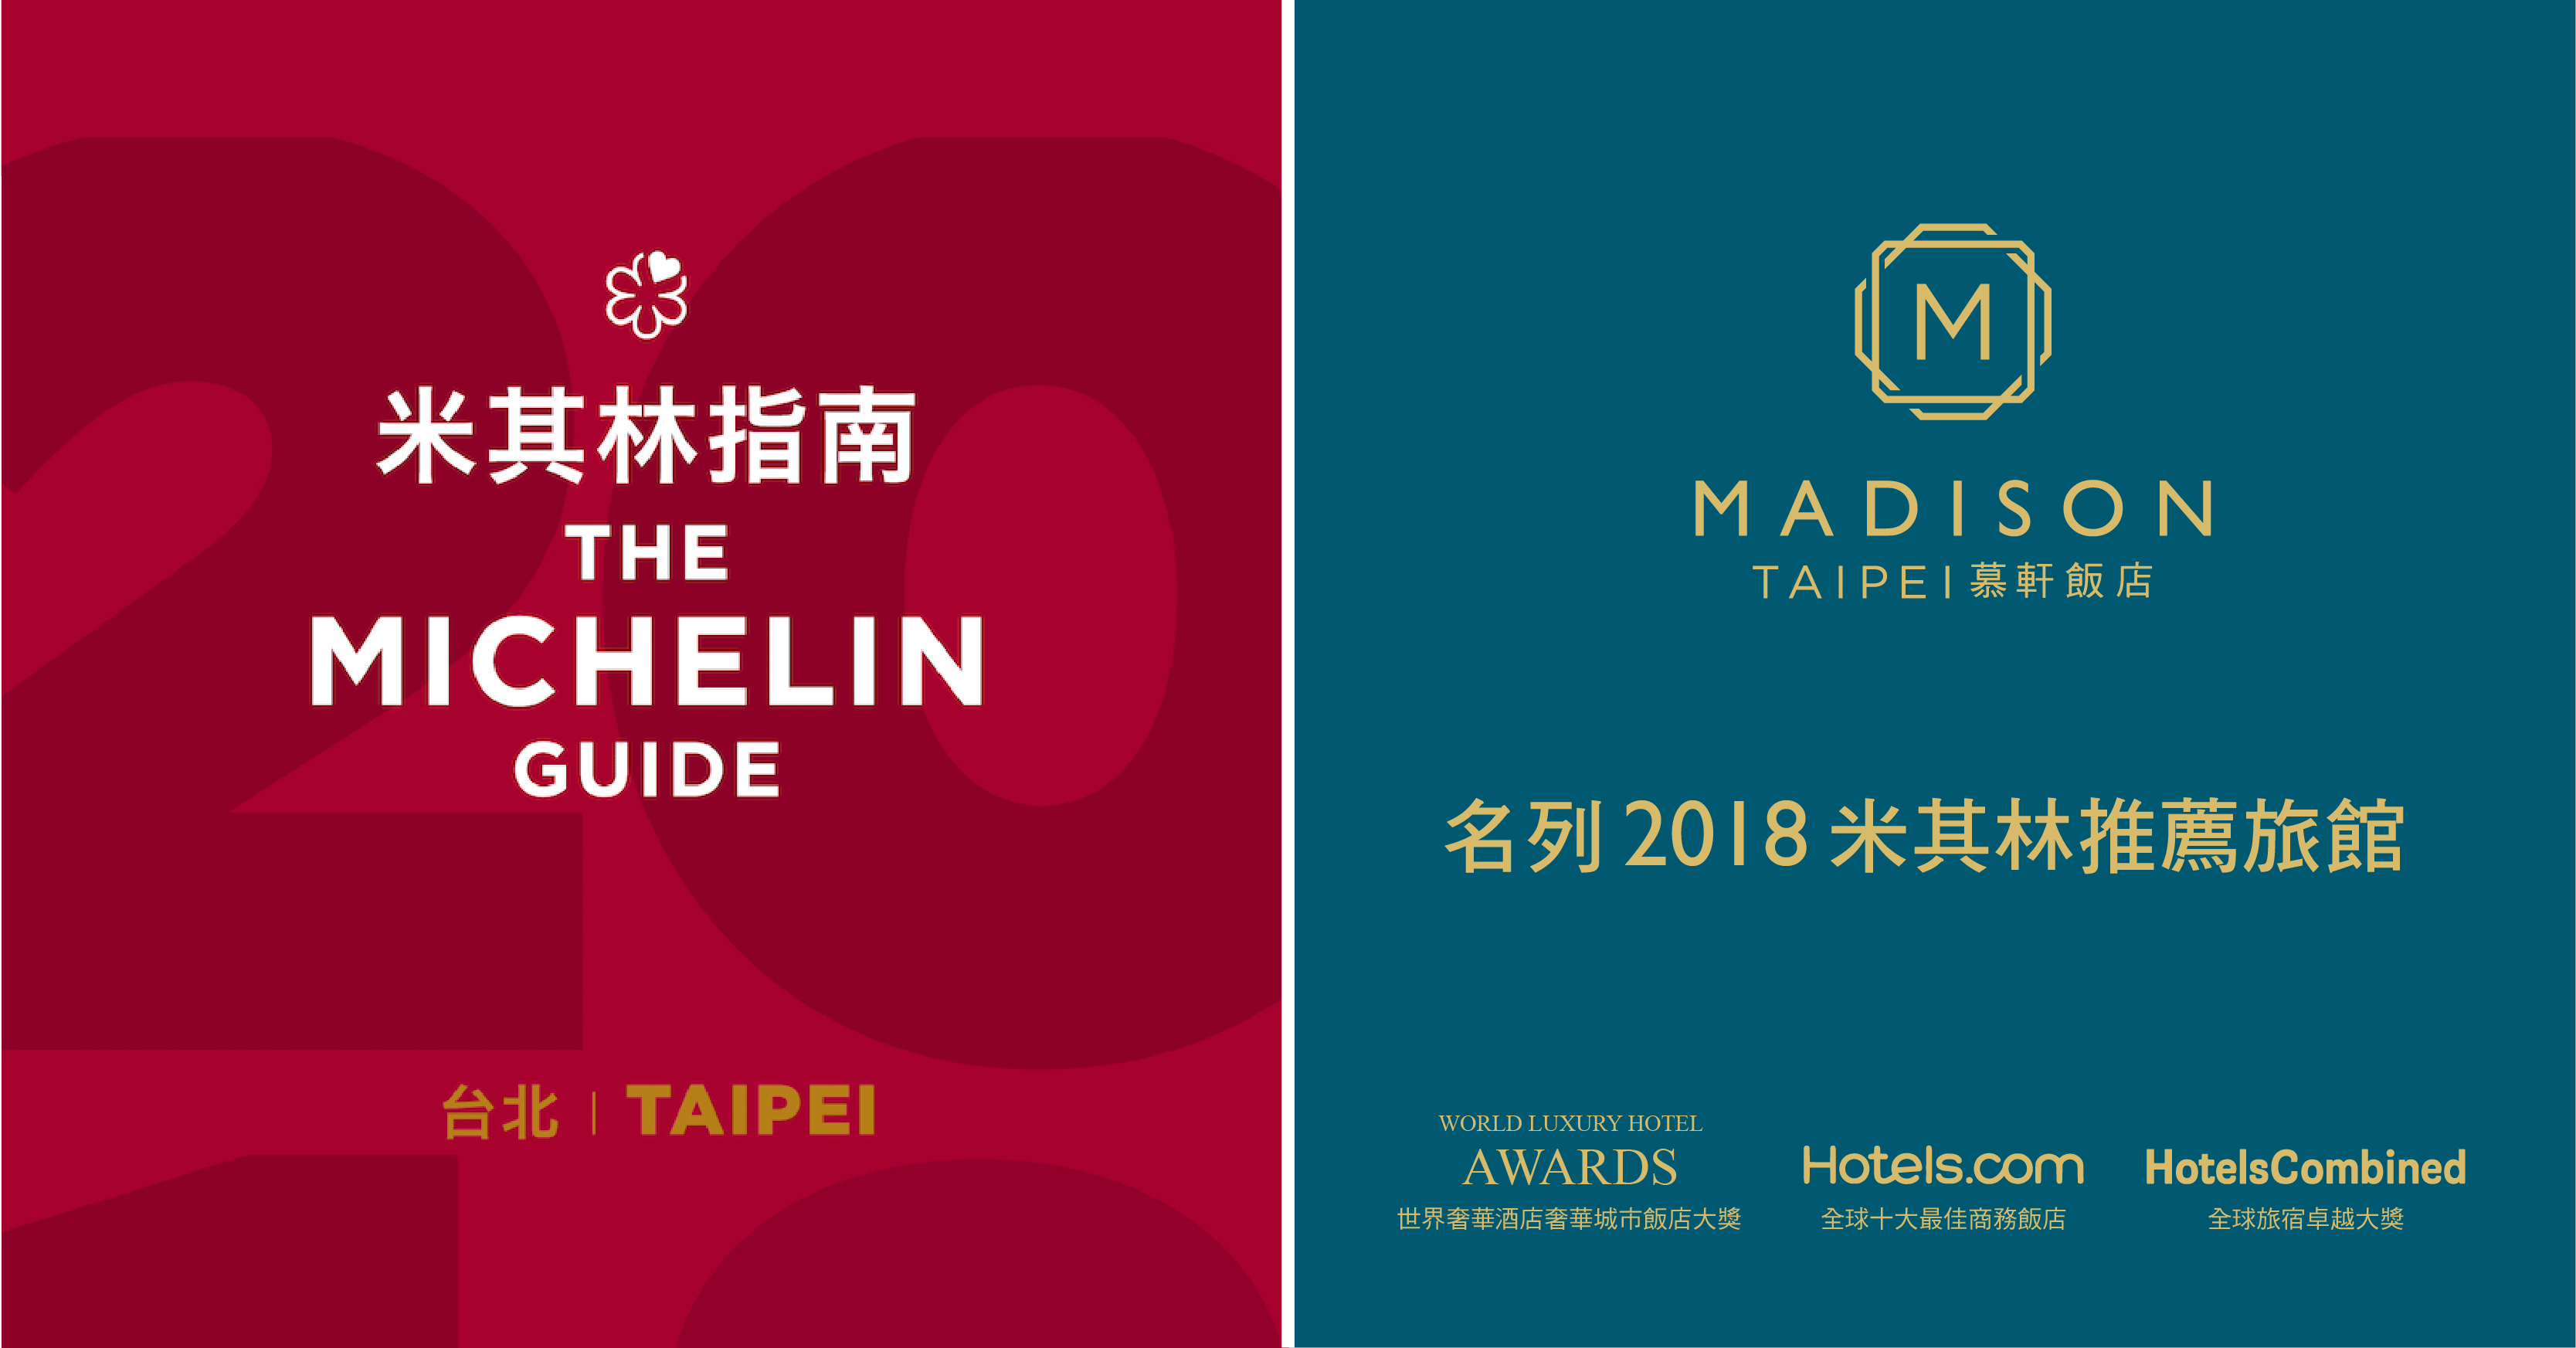 Madison Taipei Hotel Recommended By Michelin Guide 2018 Madisontaipei